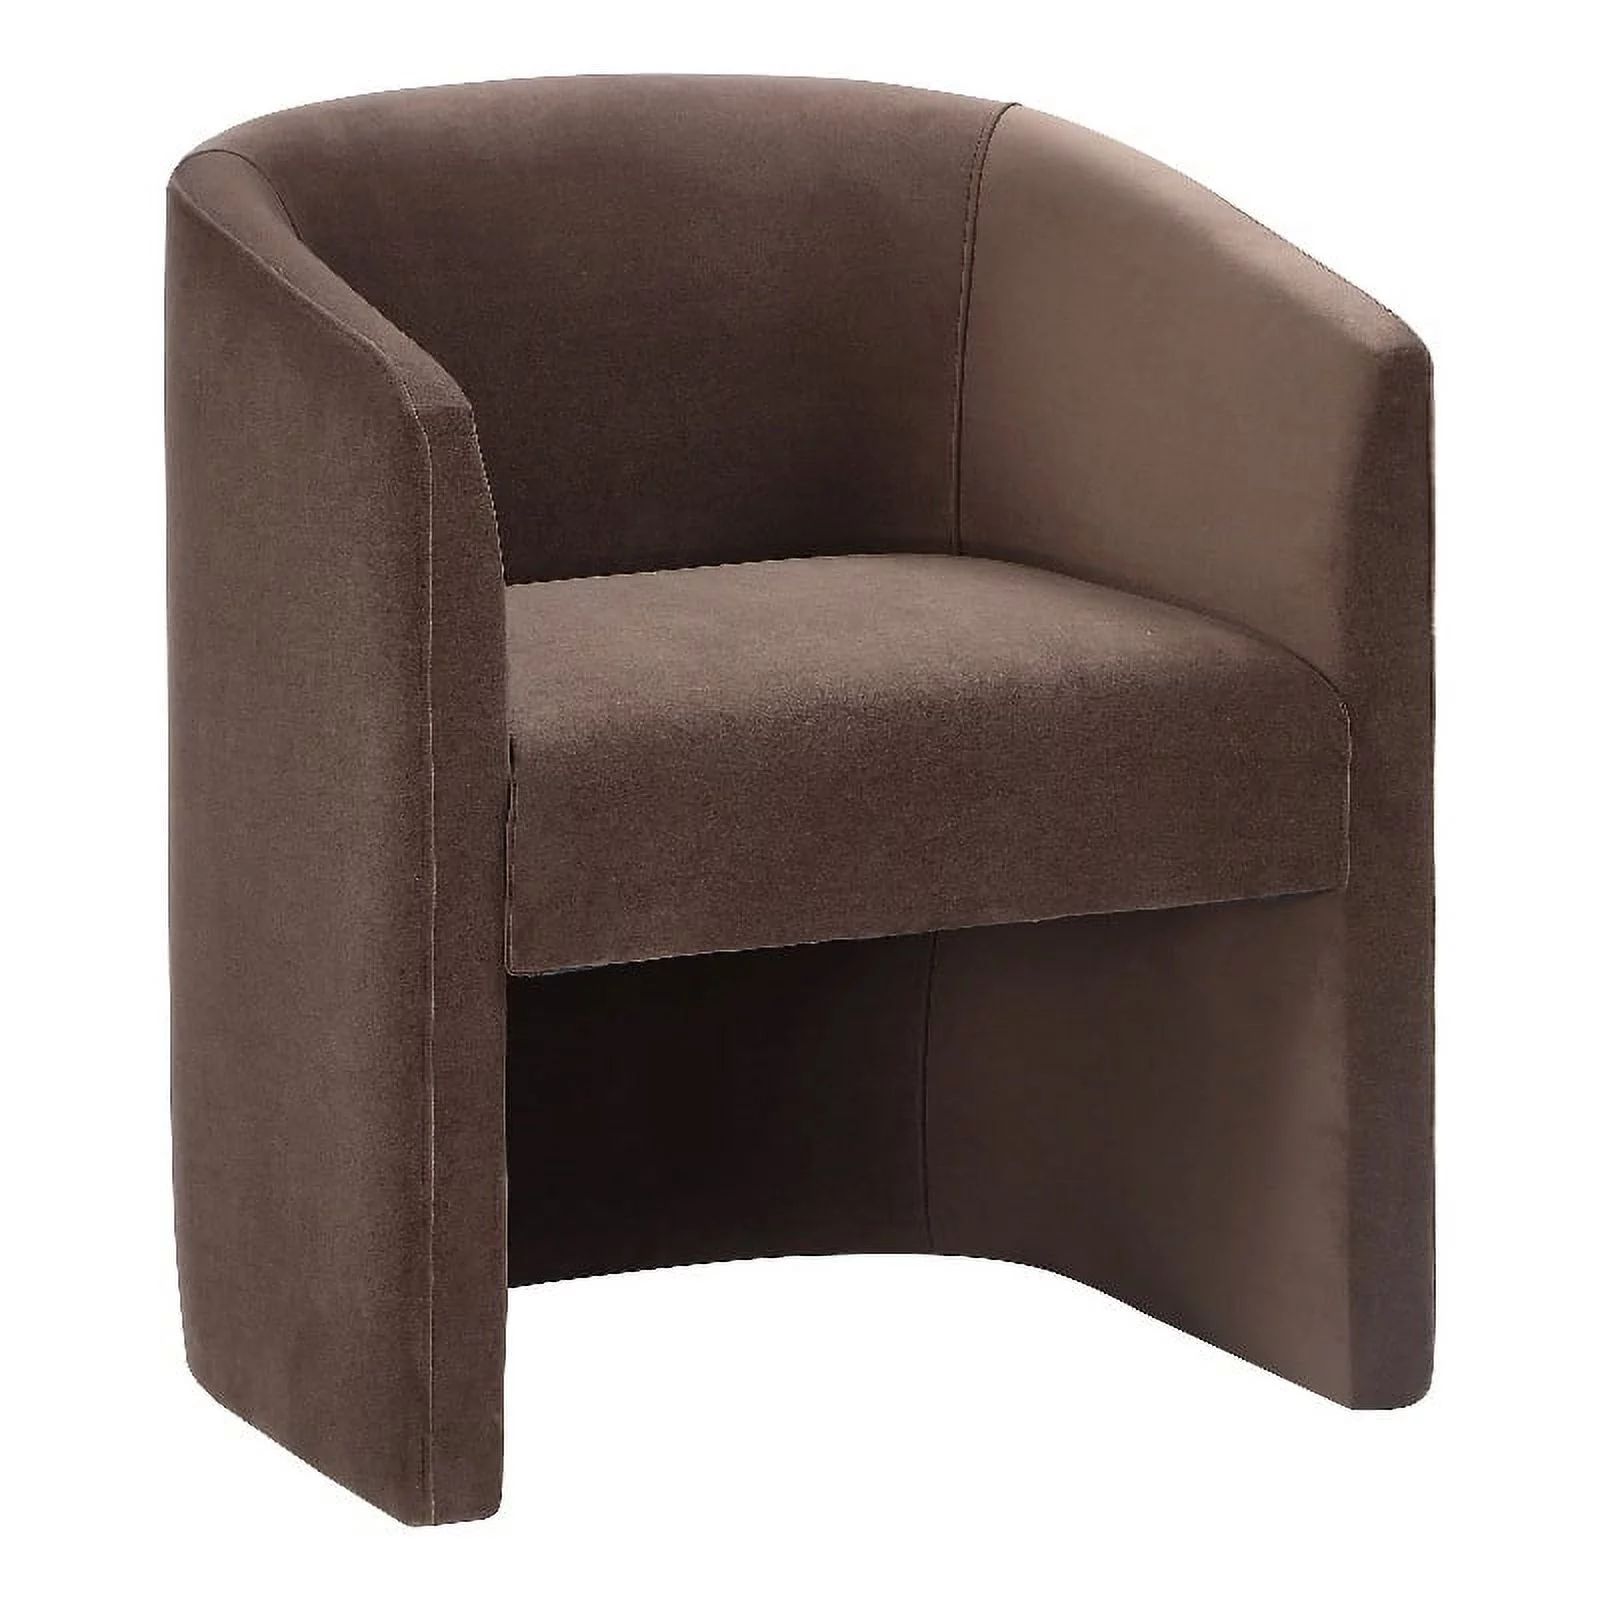 Iris Upholstered Dining or Accent Chair in Cocoa Velvet | Walmart (US)